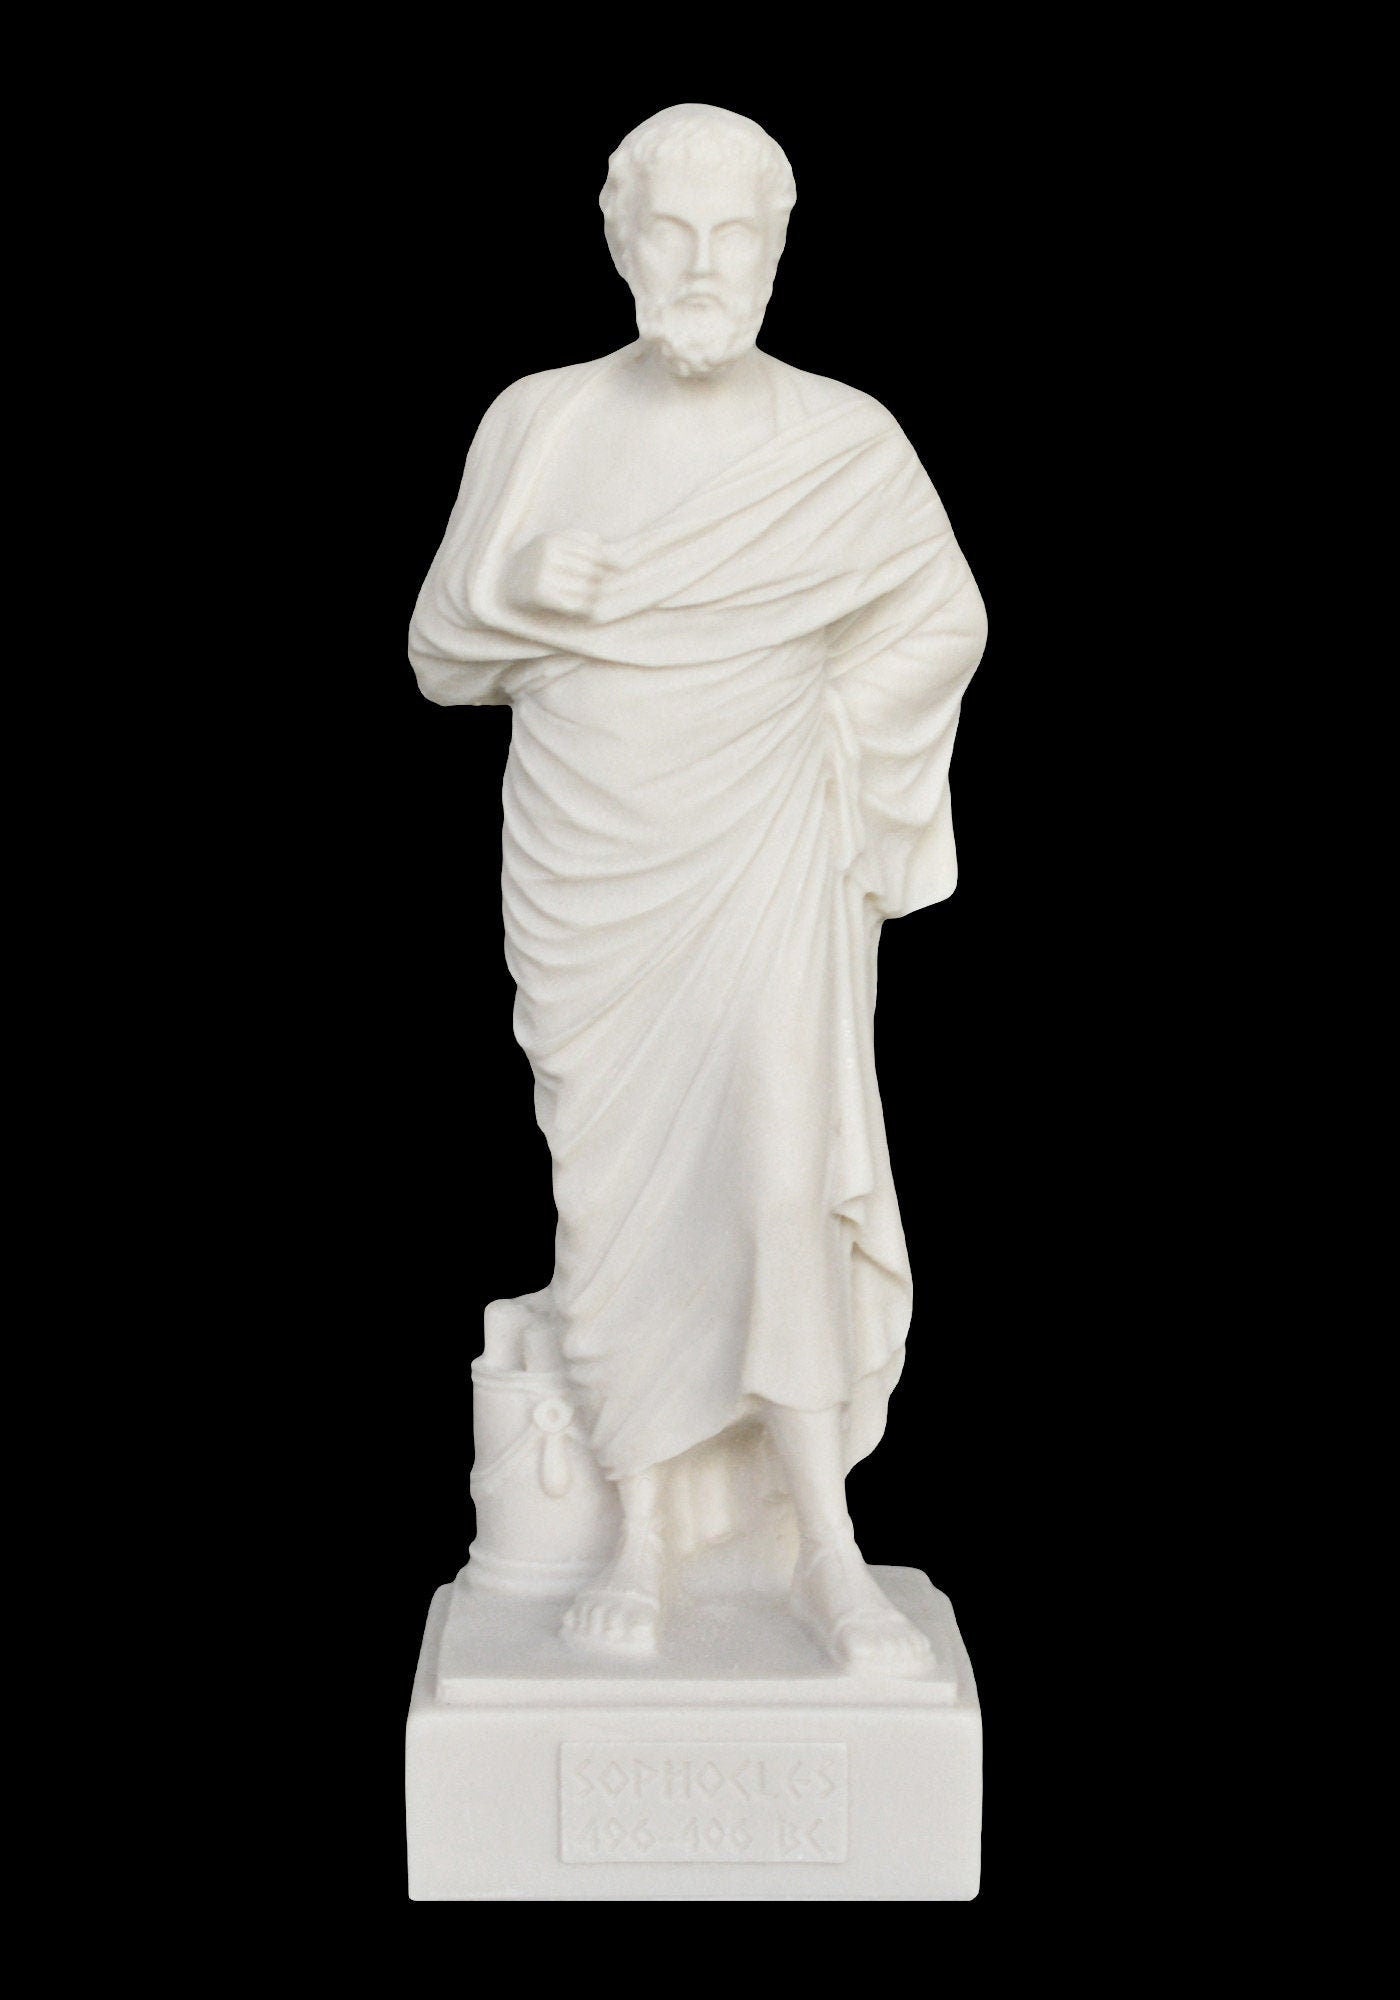 Sophocles - Ancient Athenian Tragedian - 497-406 BC - Theater - Oedipus, Antigone - Dramatic StructureI Innovations - Alabaster Statue